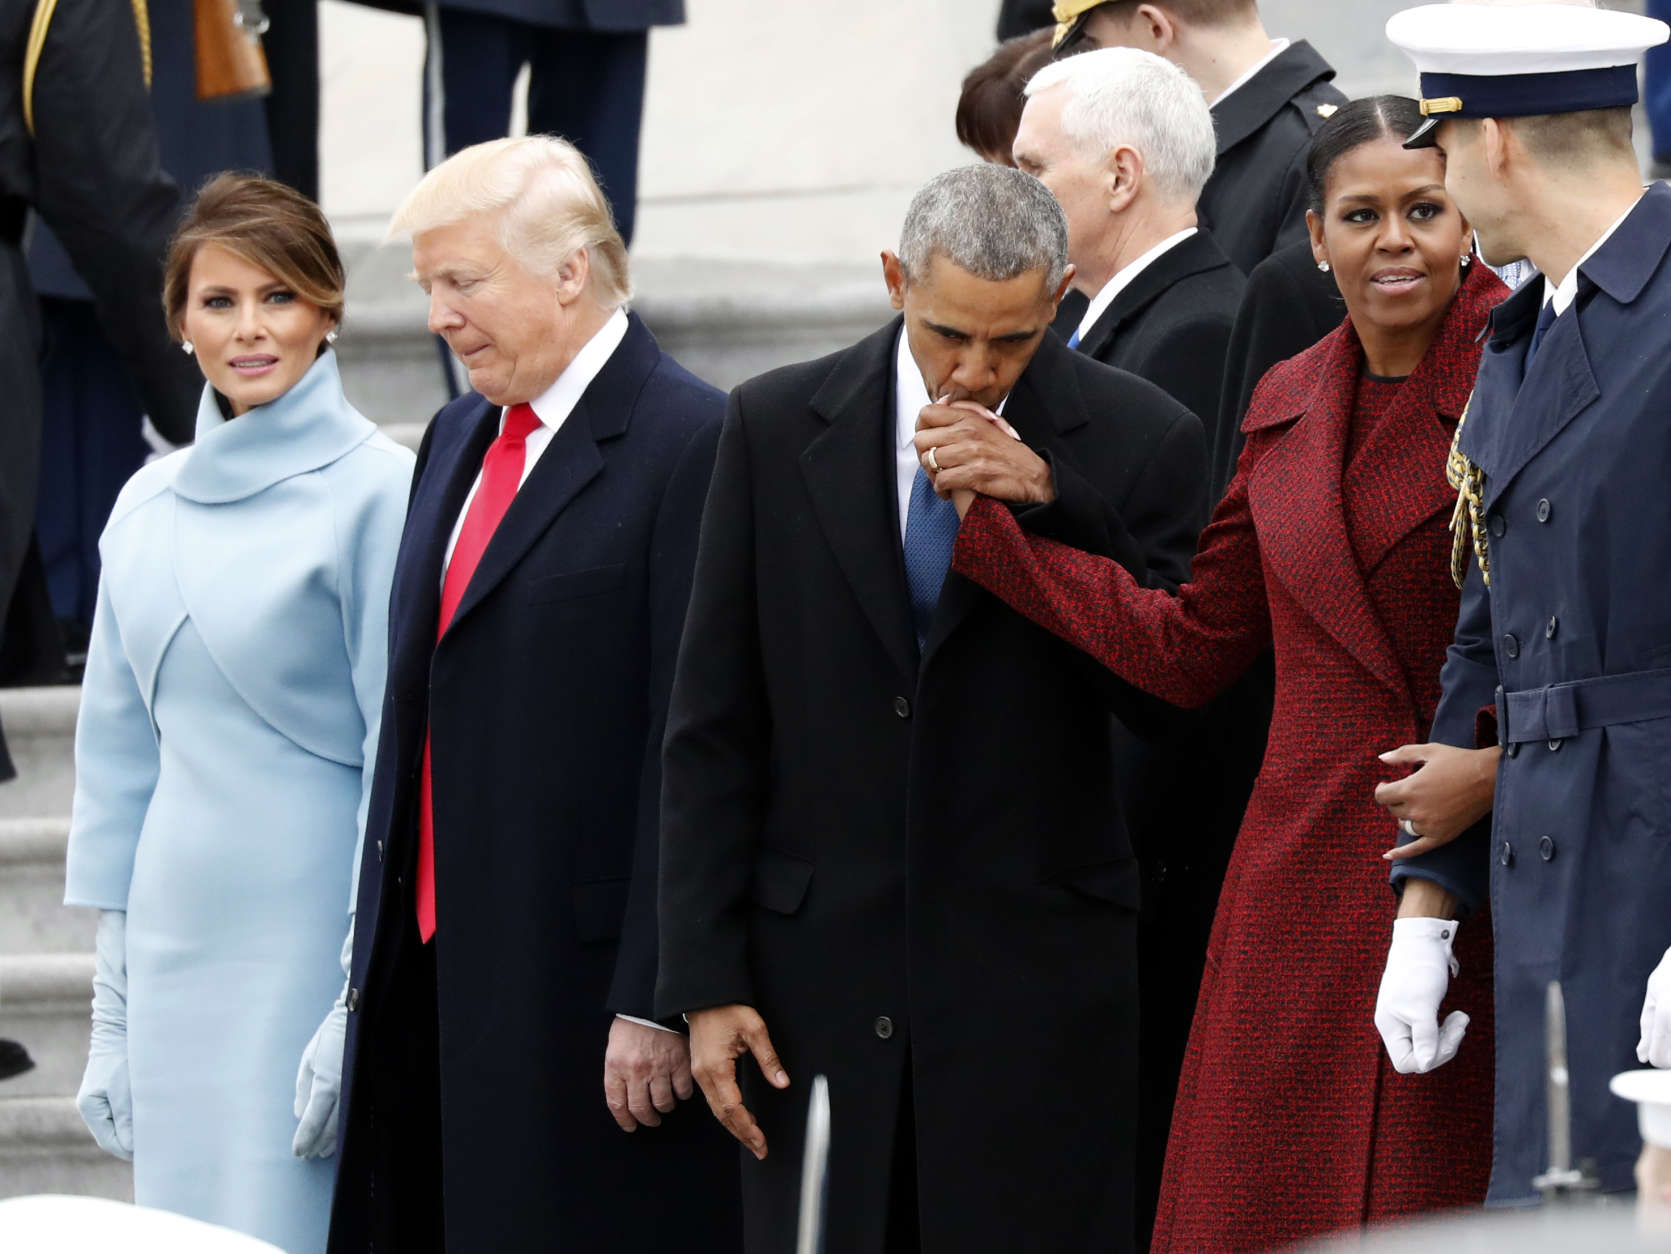 First lady Melania Trump stands with President Donald Trump as former President Barack Obama kisses the hand of his wife Michelle Obama, during a departure ceremony on the East Front of the U.S. Capitol, Friday, Jan. 20, 2017 in Washington. (AP Photo/Alex Brandon)